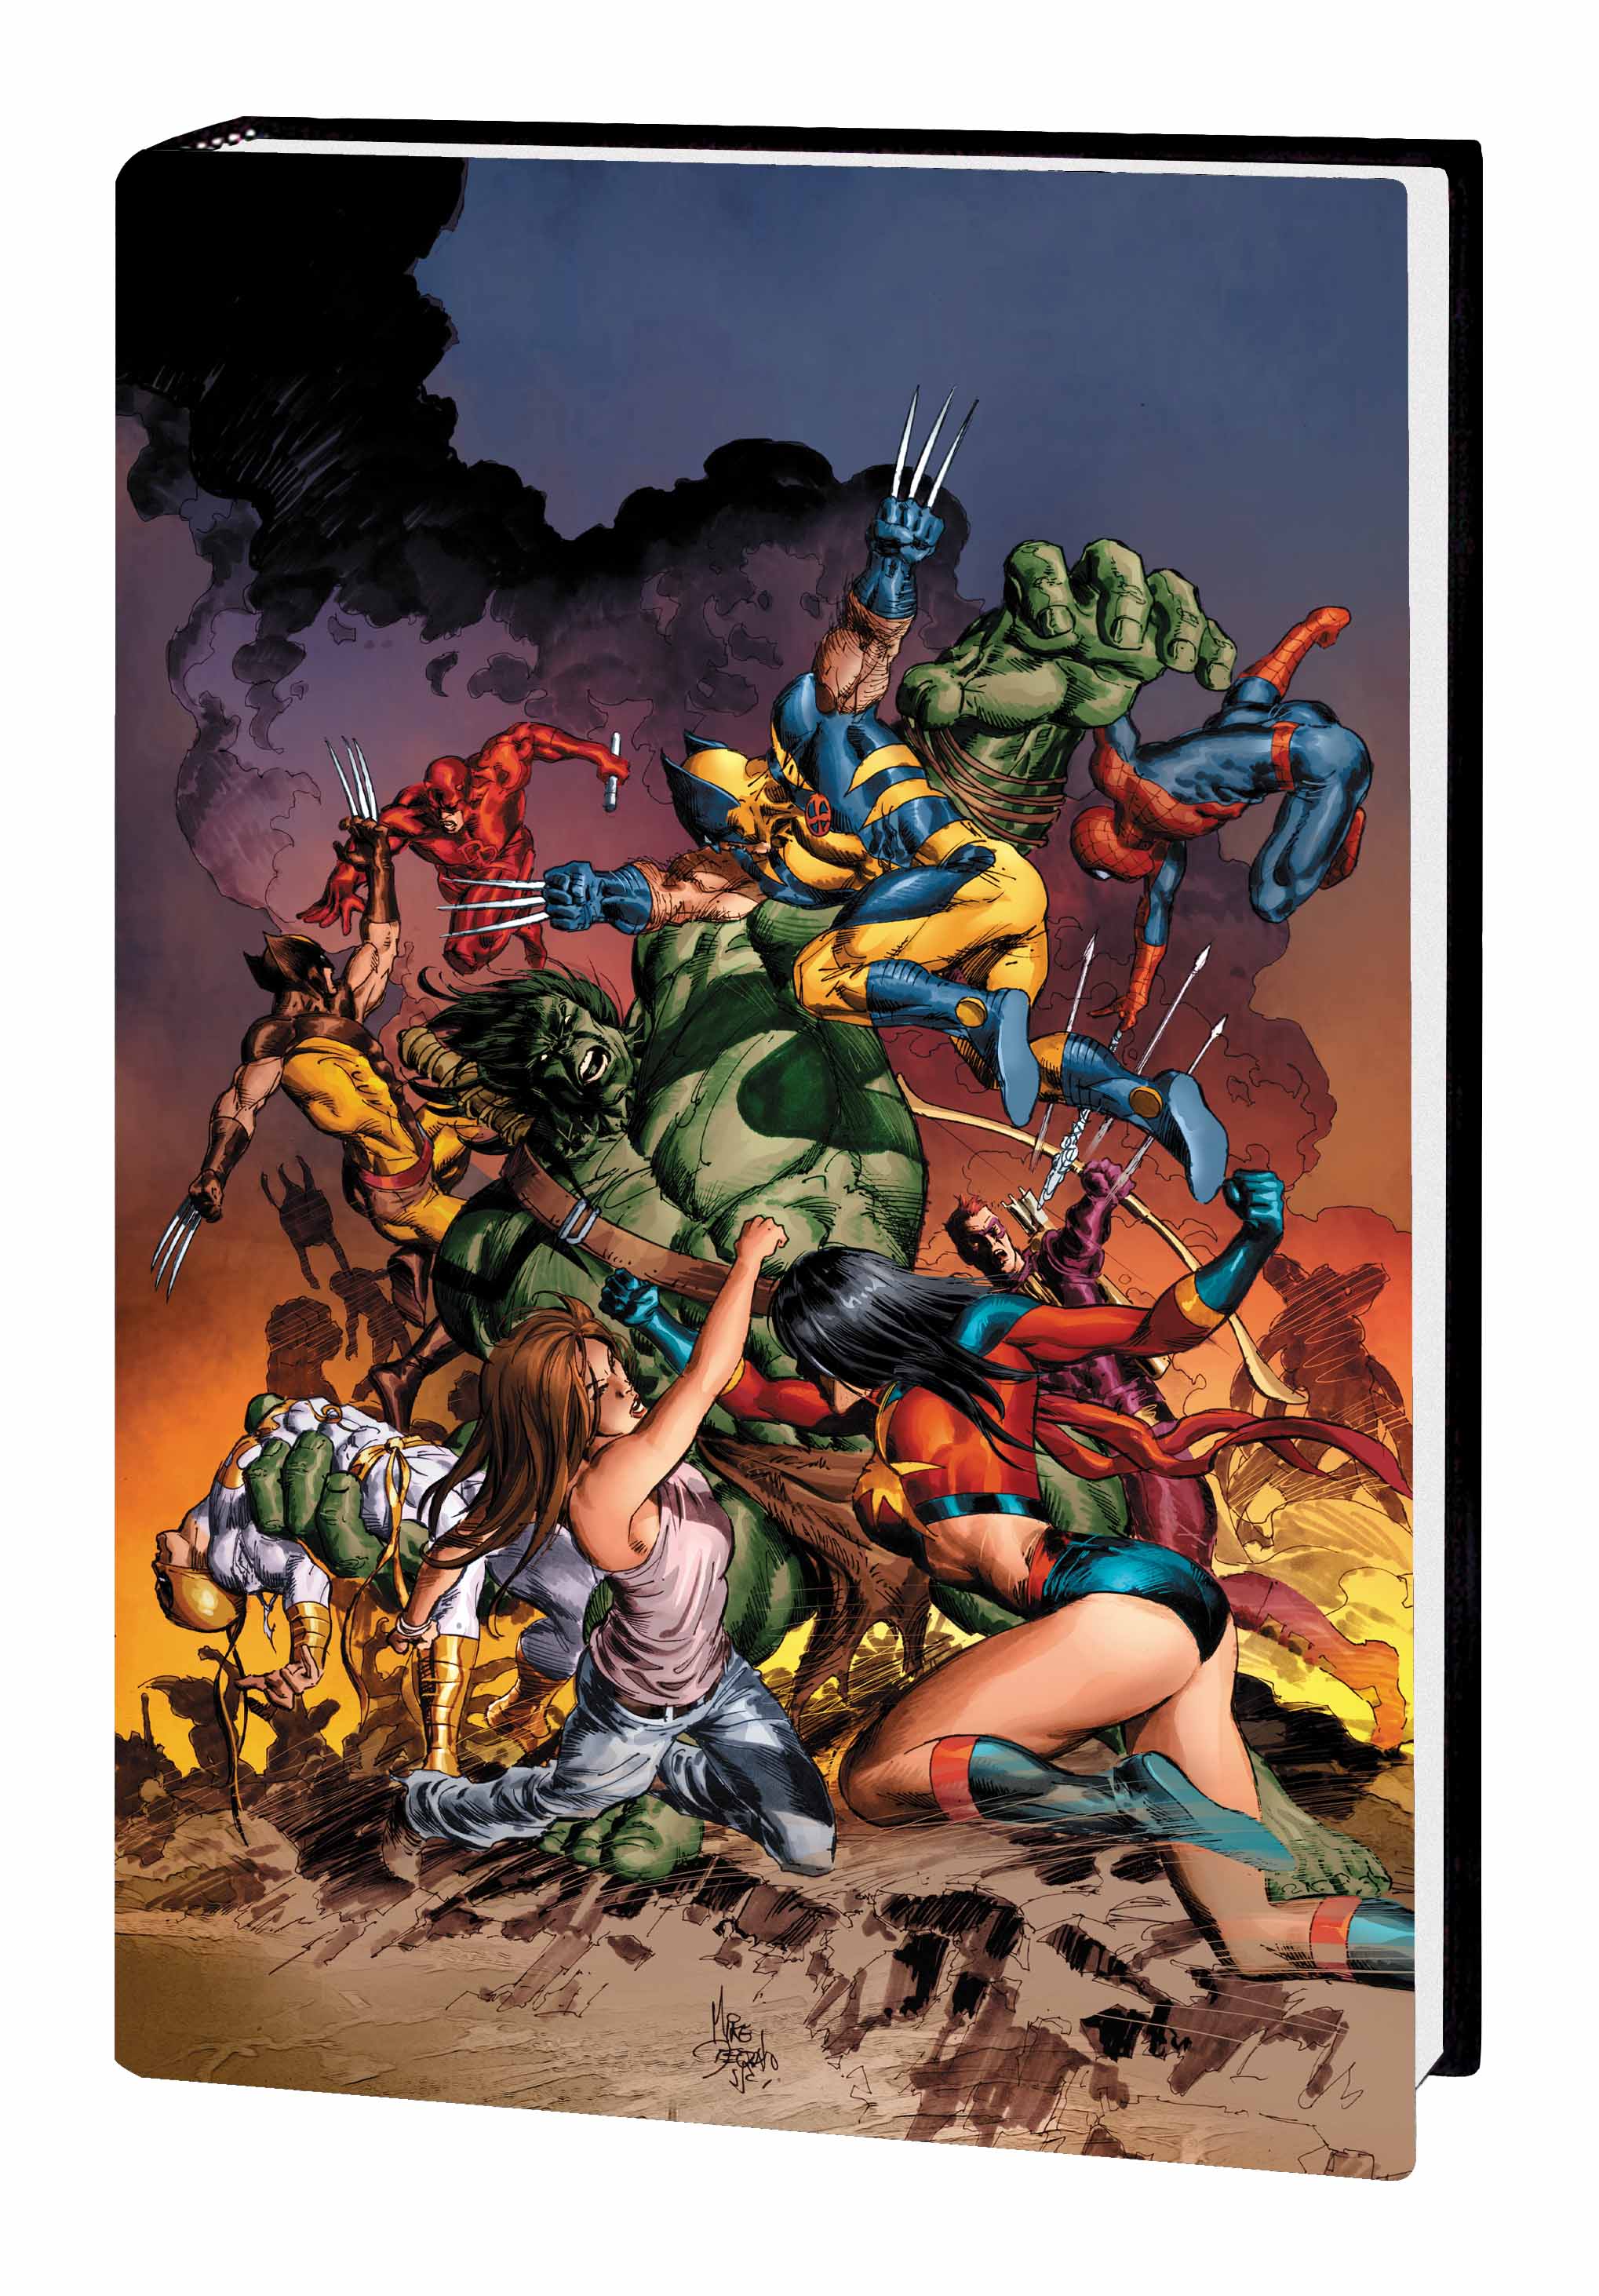 The New Avengers, Vol. 1 by Brian Michael Bendis